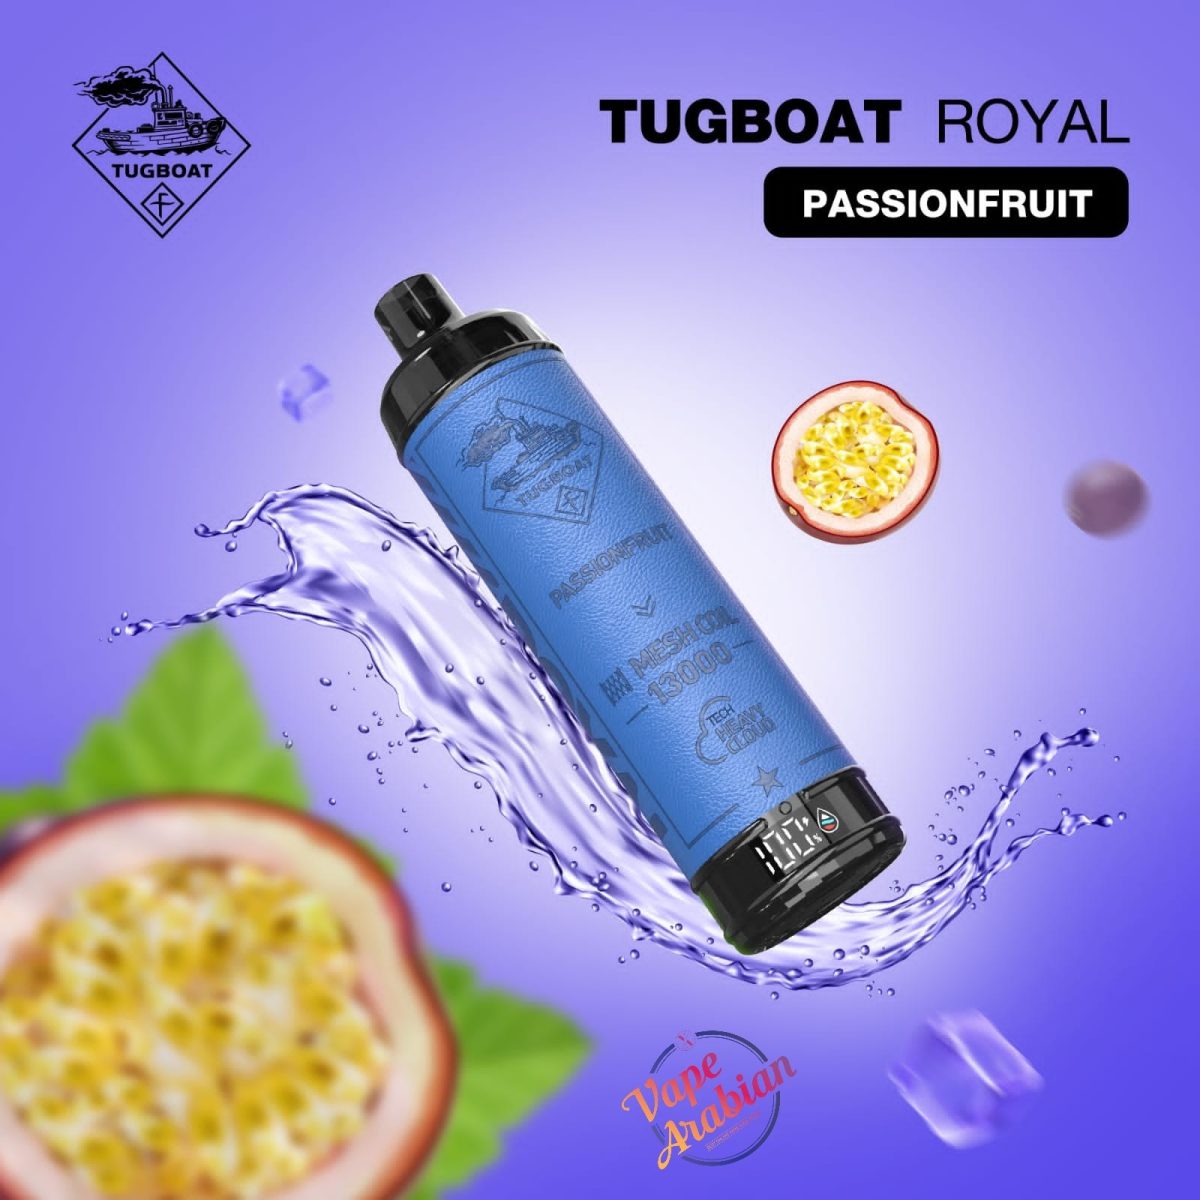 Tugboat Royal 13000 Puffs 50mg Disposable Vape in UAE